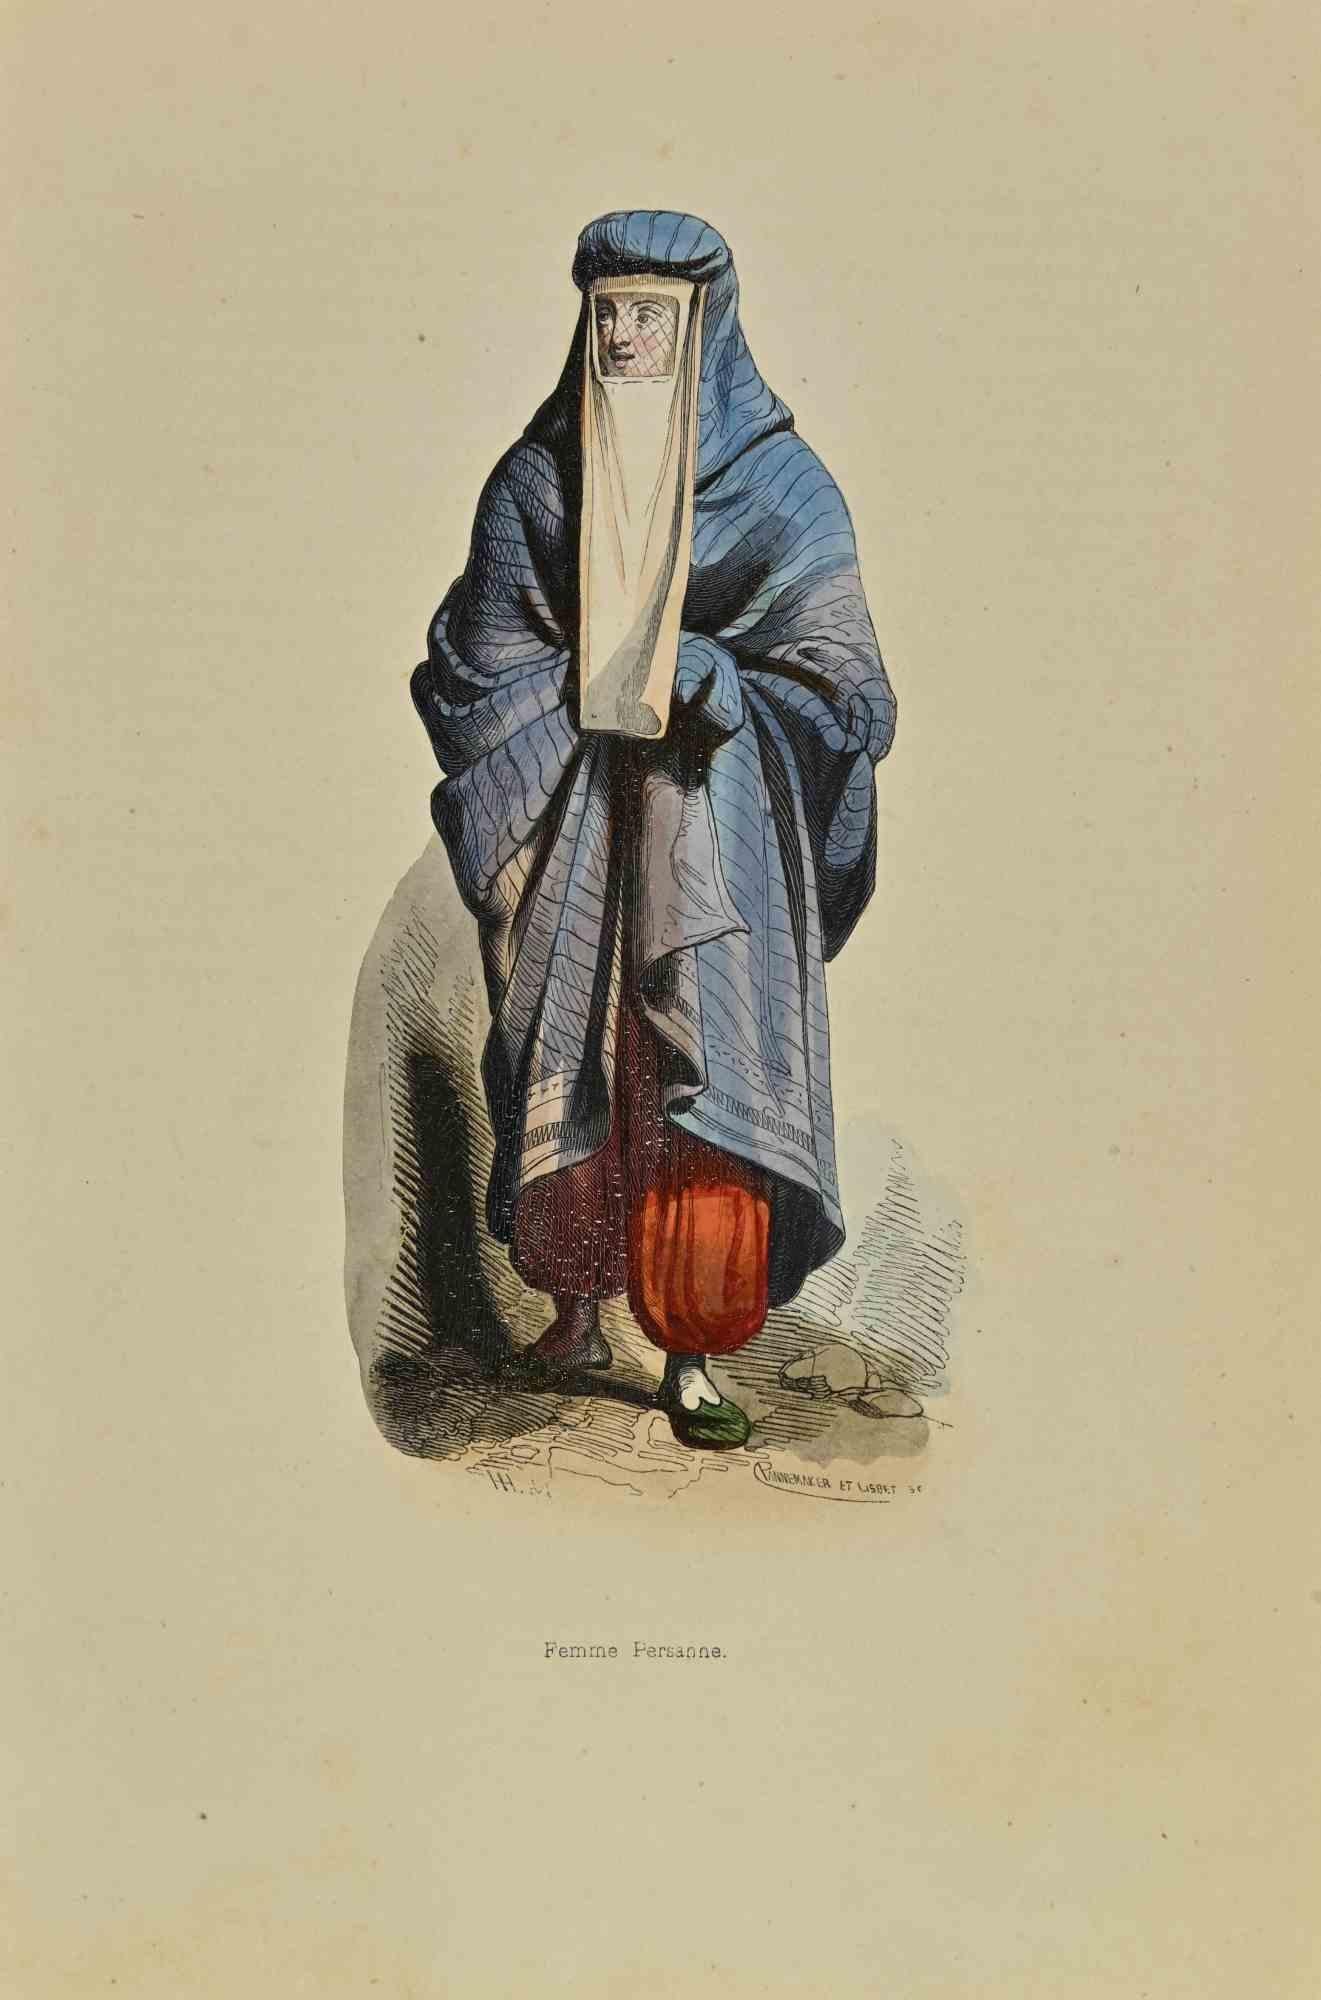 Persian Woman is a lithograph made by Auguste Wahlen in 1844.

Hand colored.

Good condition.

At the center of the artwork is the original title "Femme Persanne".

The work is part of Suite Moeurs, usages et costumes de tous les peuples du monde,